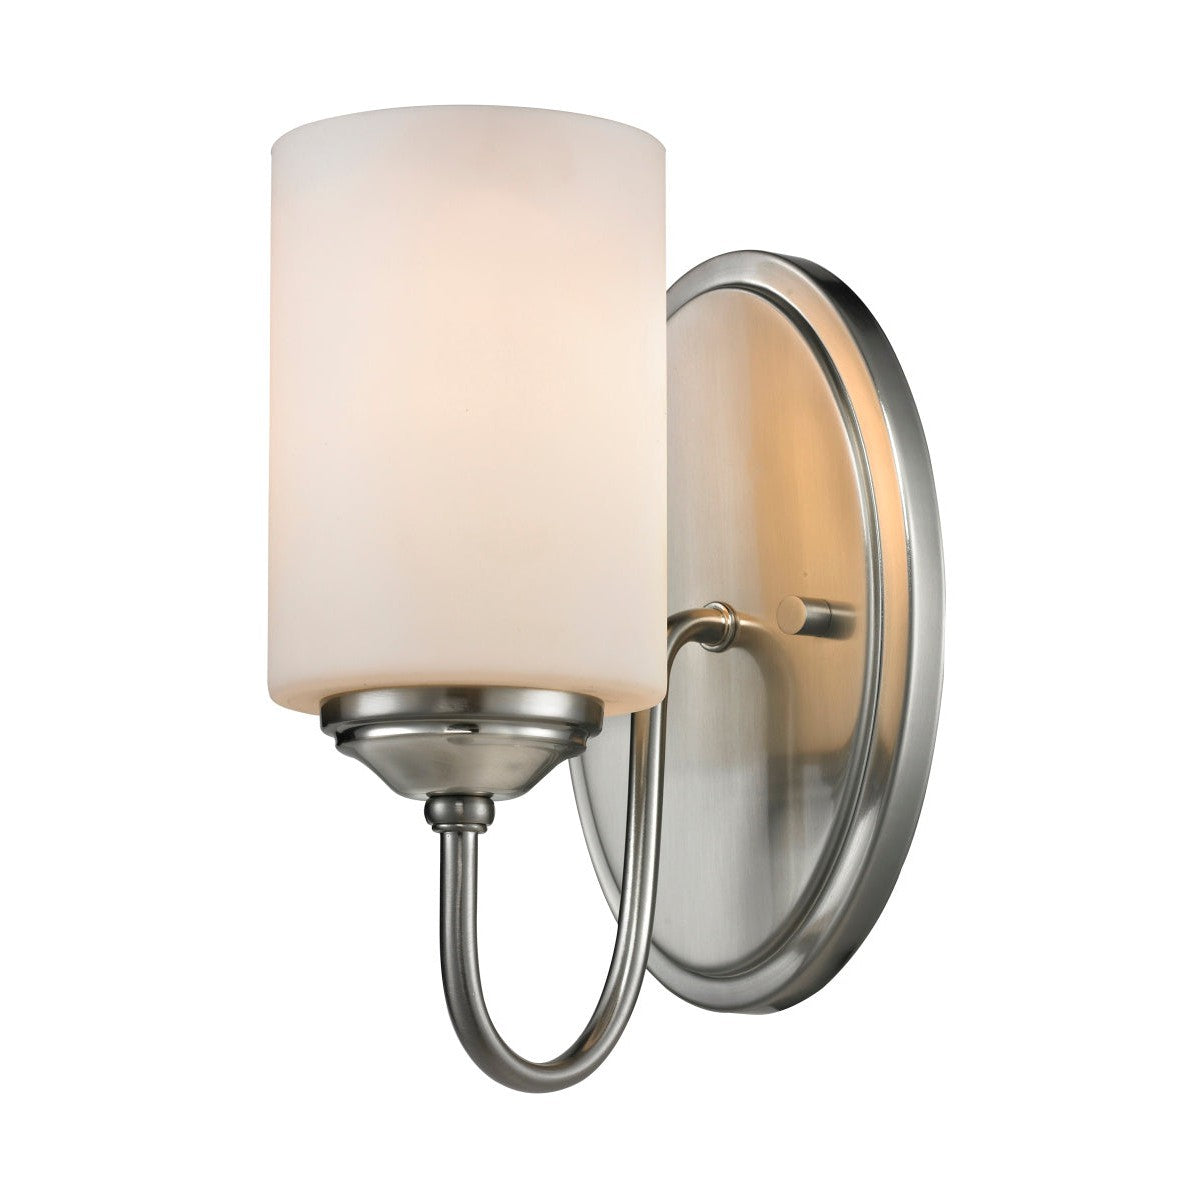 Z-Lite Cardinal 434-1S-BN Wall Sconce Light - Brushed Nickel